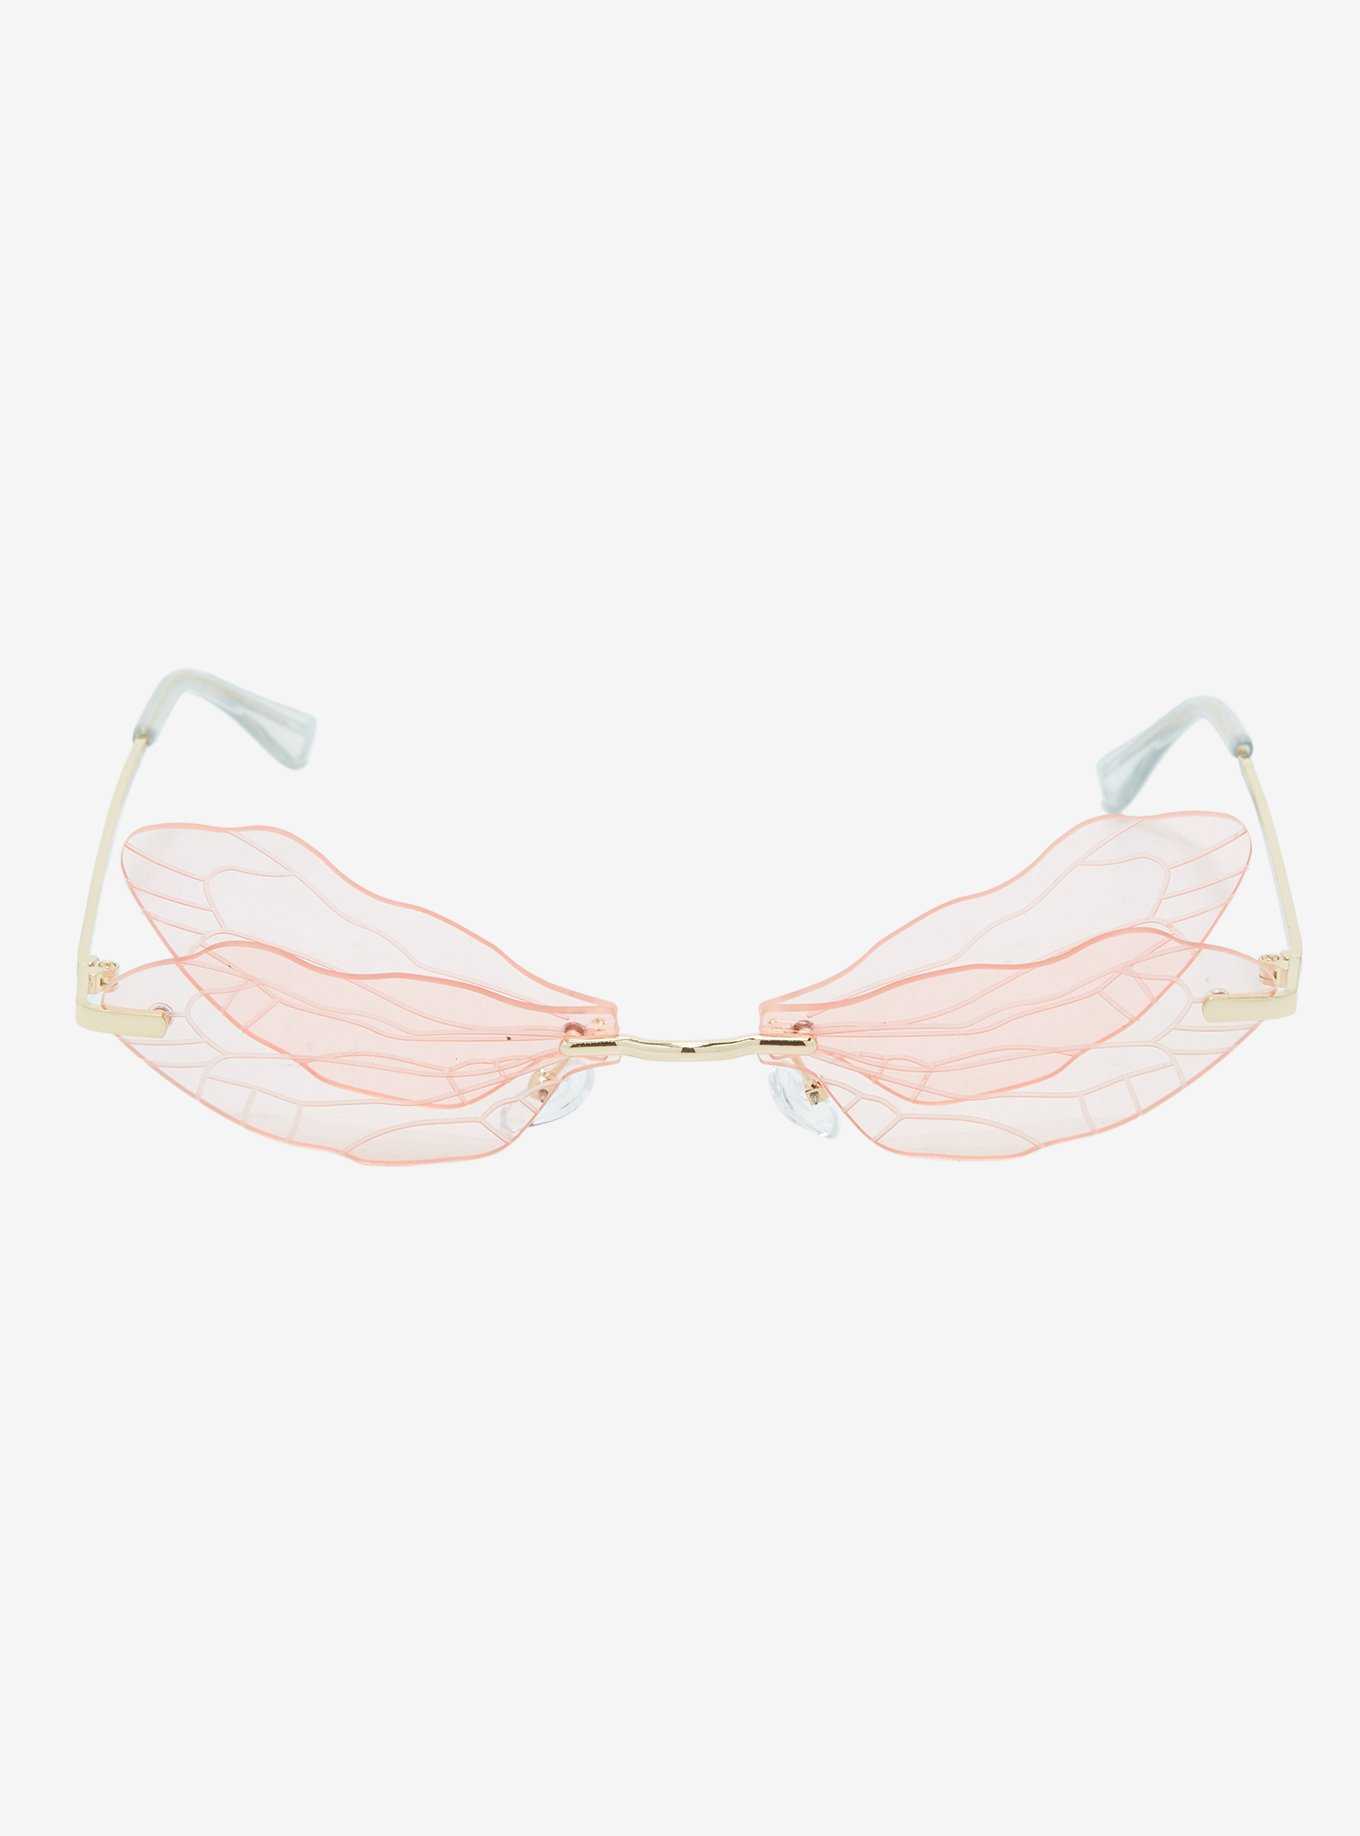 Orange Butterfly Wing Sunglasses, , hi-res